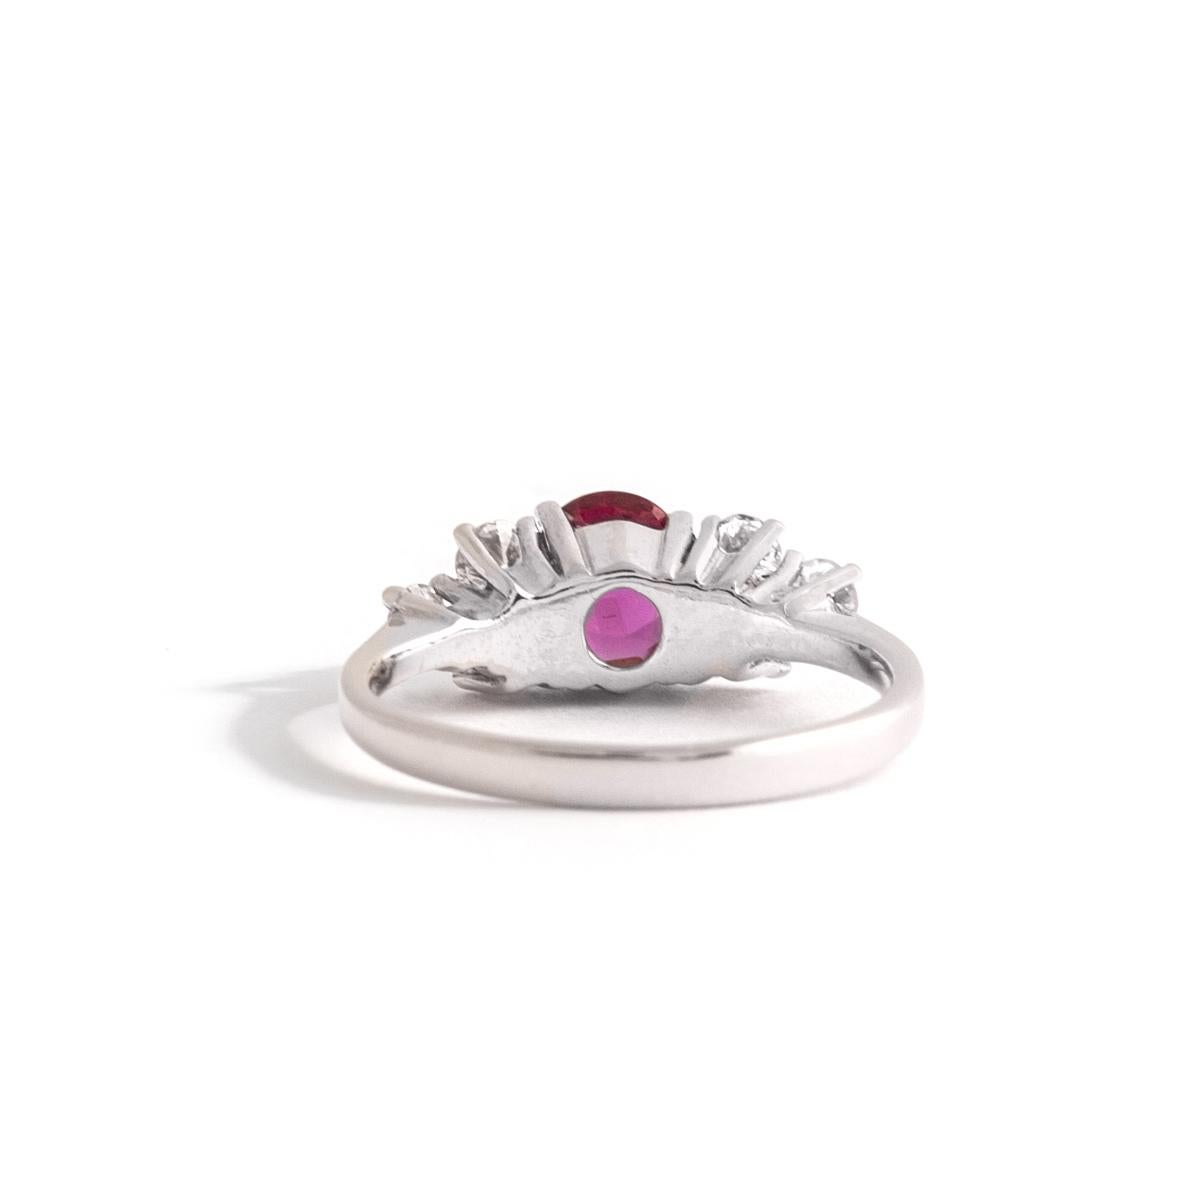 Oval Cut Ruby Diamond Ring For Sale